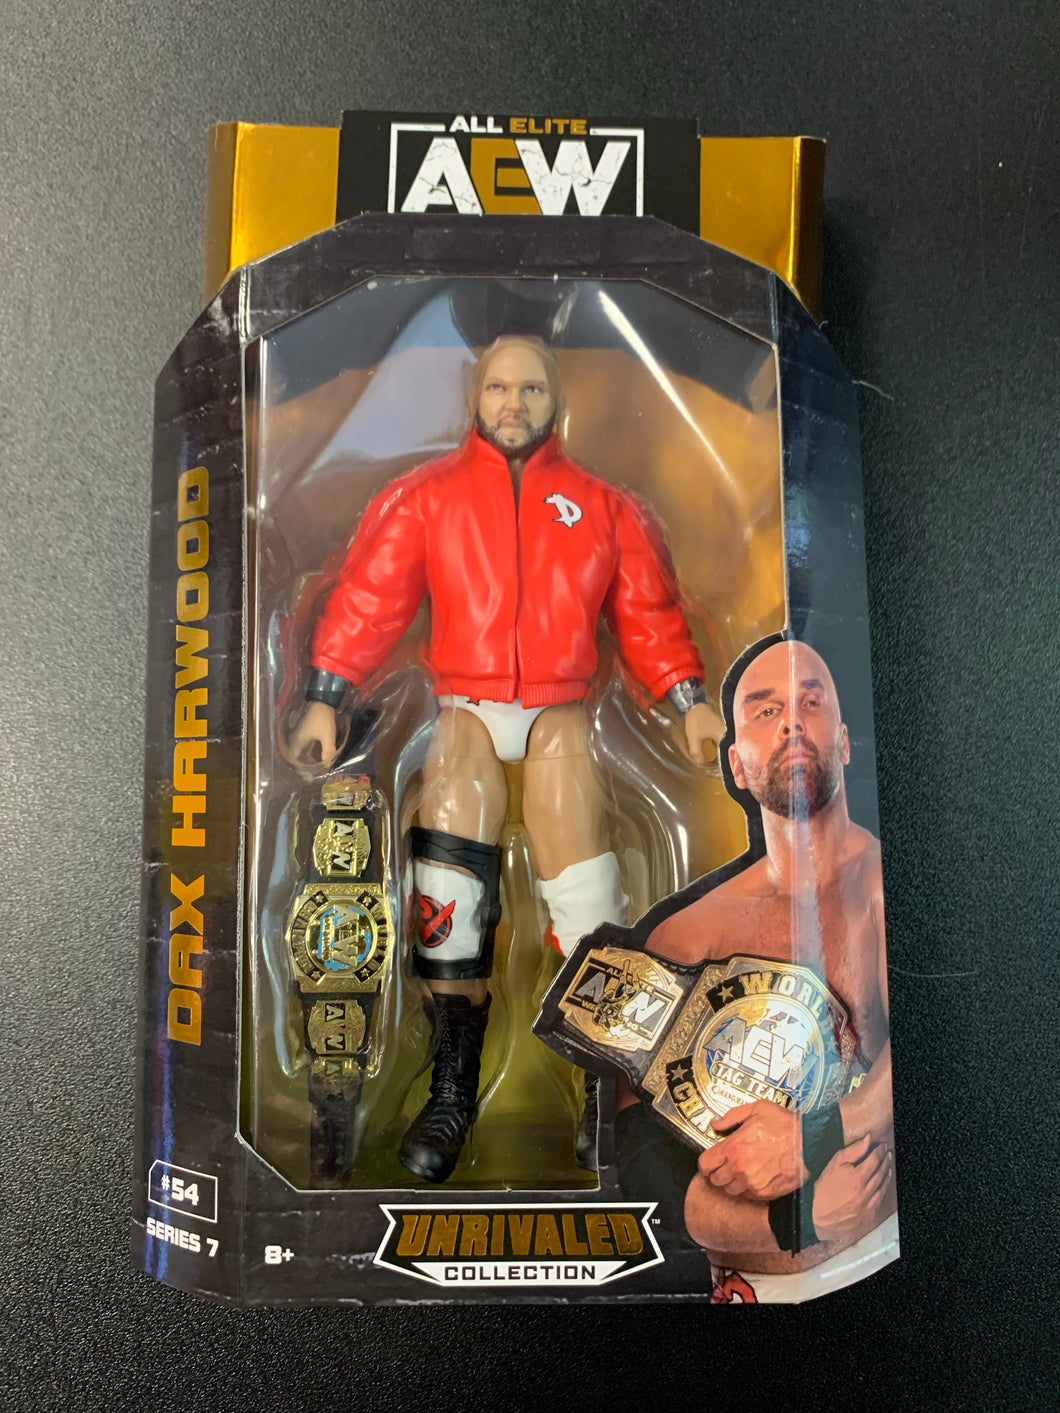 AEW DAX HARWOOD UNRIVALED COLLECTION #54 SERIES 7